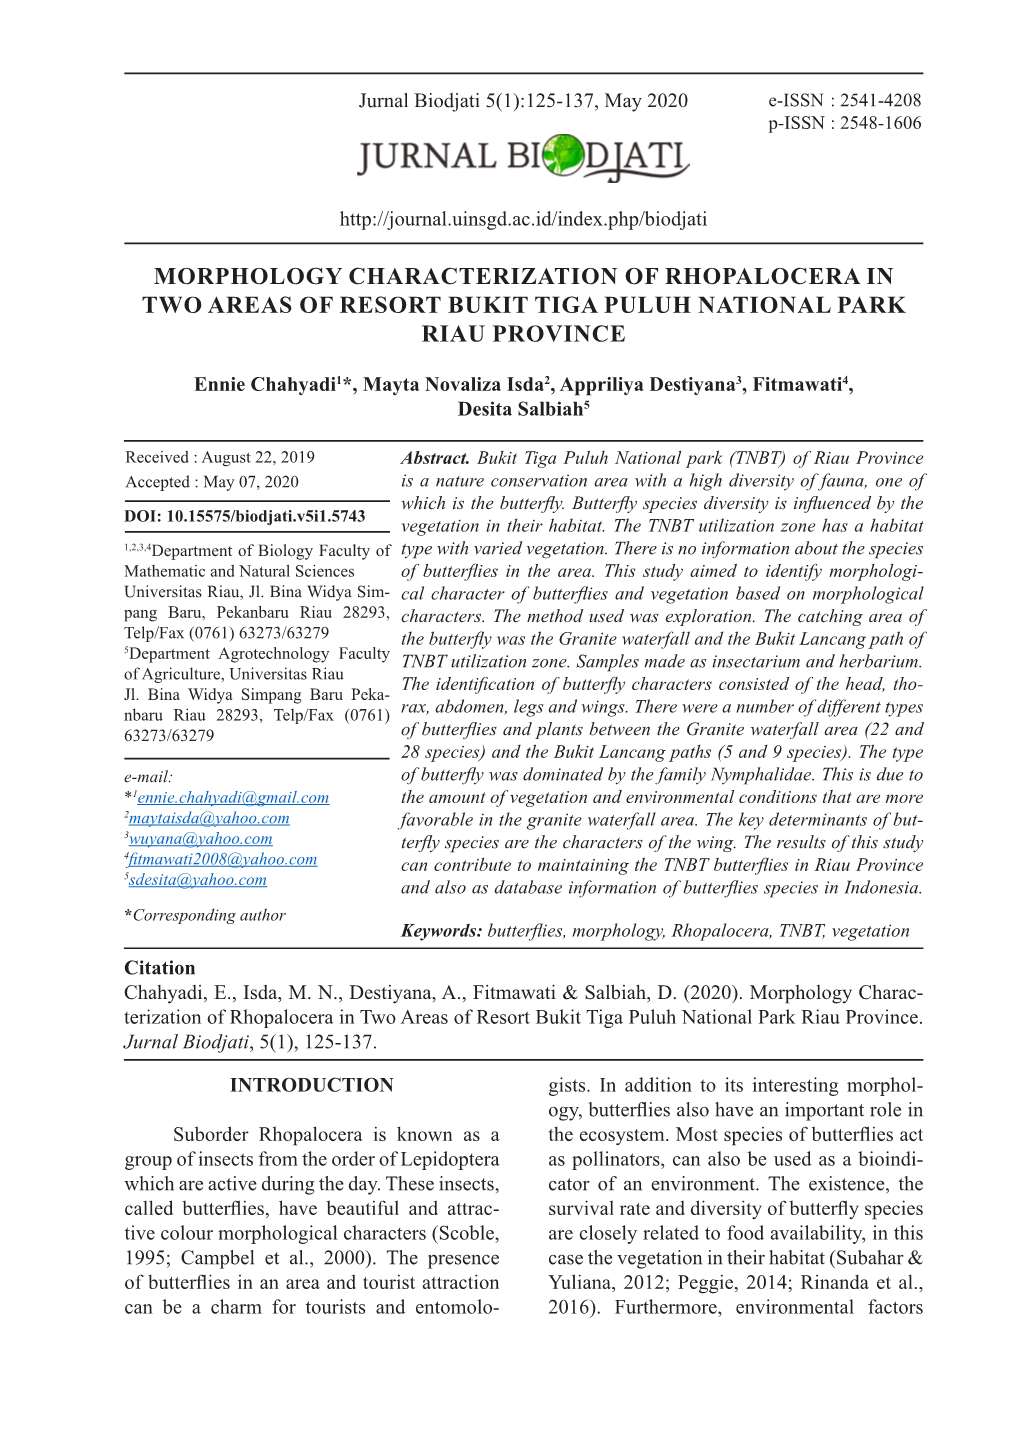 Morphology Characterization of Rhopalocera in Two Areas of Resort Bukit Tiga Puluh National Park Riau Province